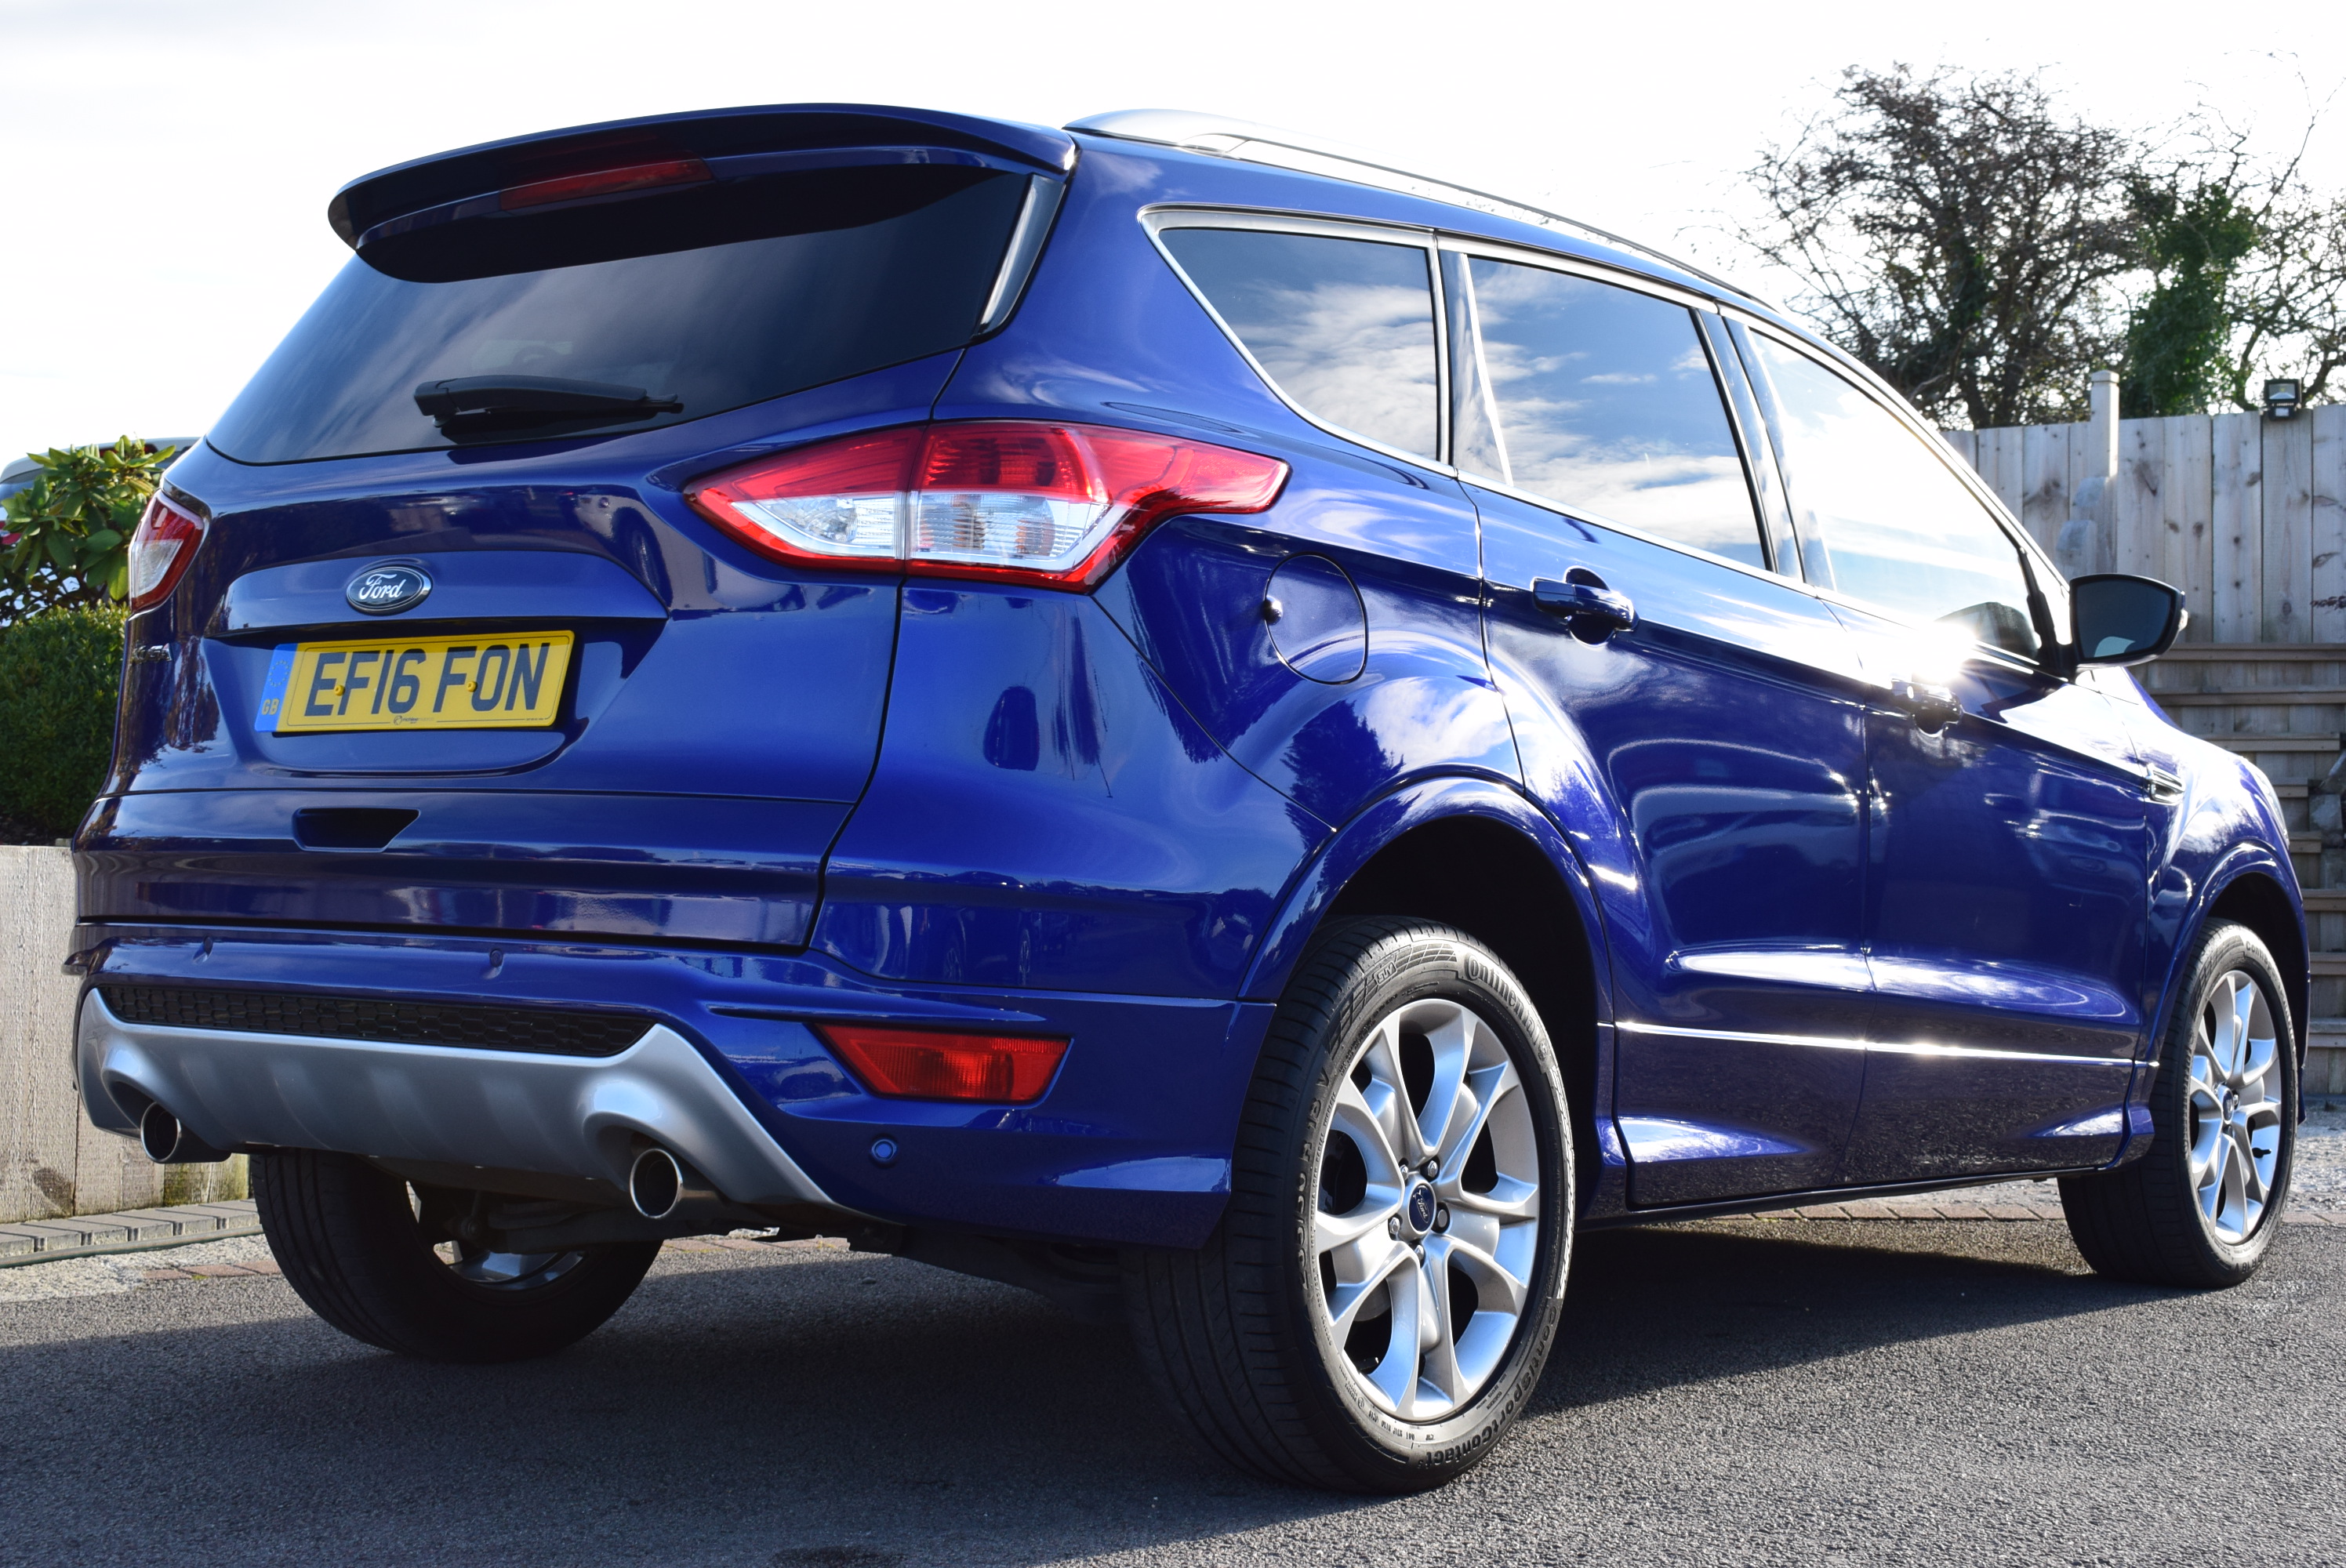 FORD KUGA 2.0 TDCi 150 Titanium Sport 5dr 2WD For Sale